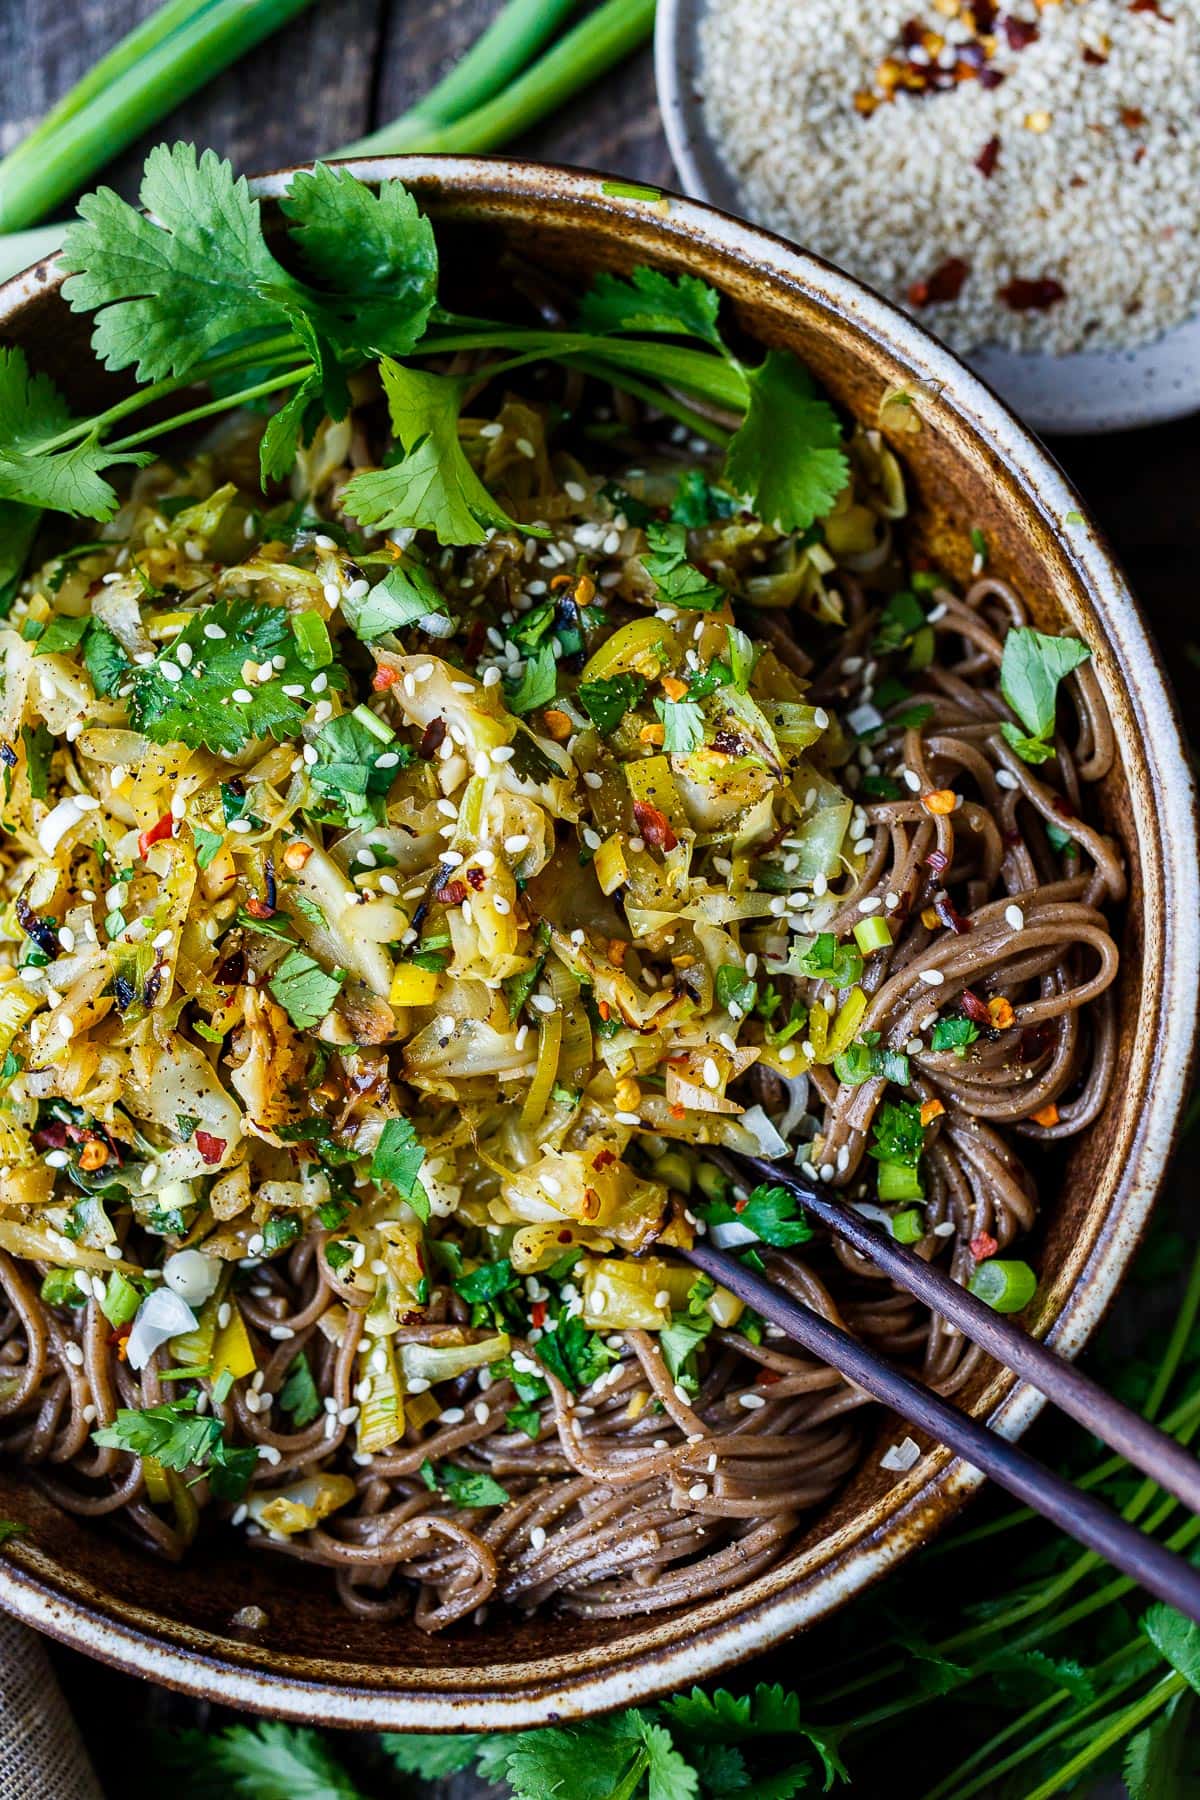 This quick and easy cabbage stir-fry is humble but packed with savory flavor.  Packed with amazing health benefits, cabbage takes center stage here, turning into a delicious side dish or a perfect topping for rice or buckwheat soba noodles.  Ready to serve in about 30 minutes!